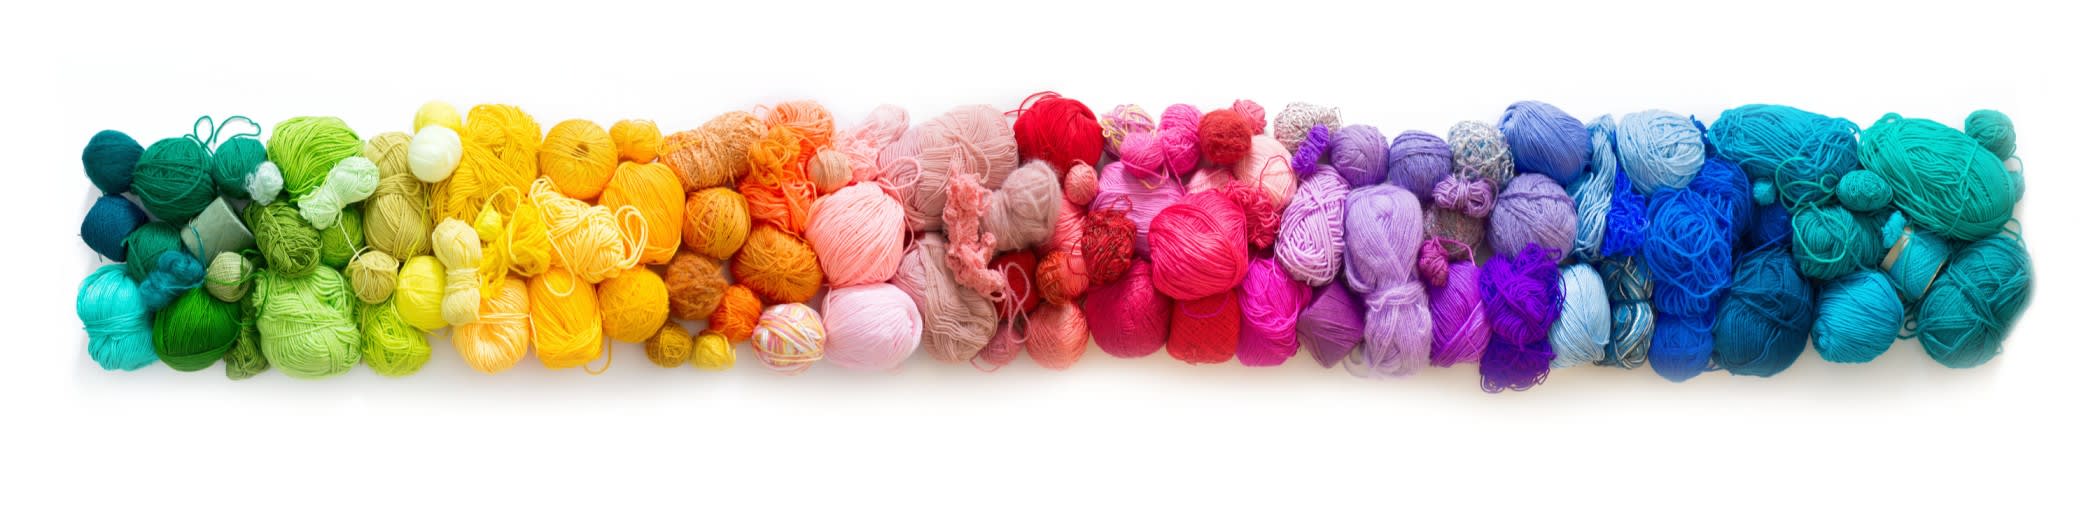 Beginner's Guide to Hand Dyeing Yarn 